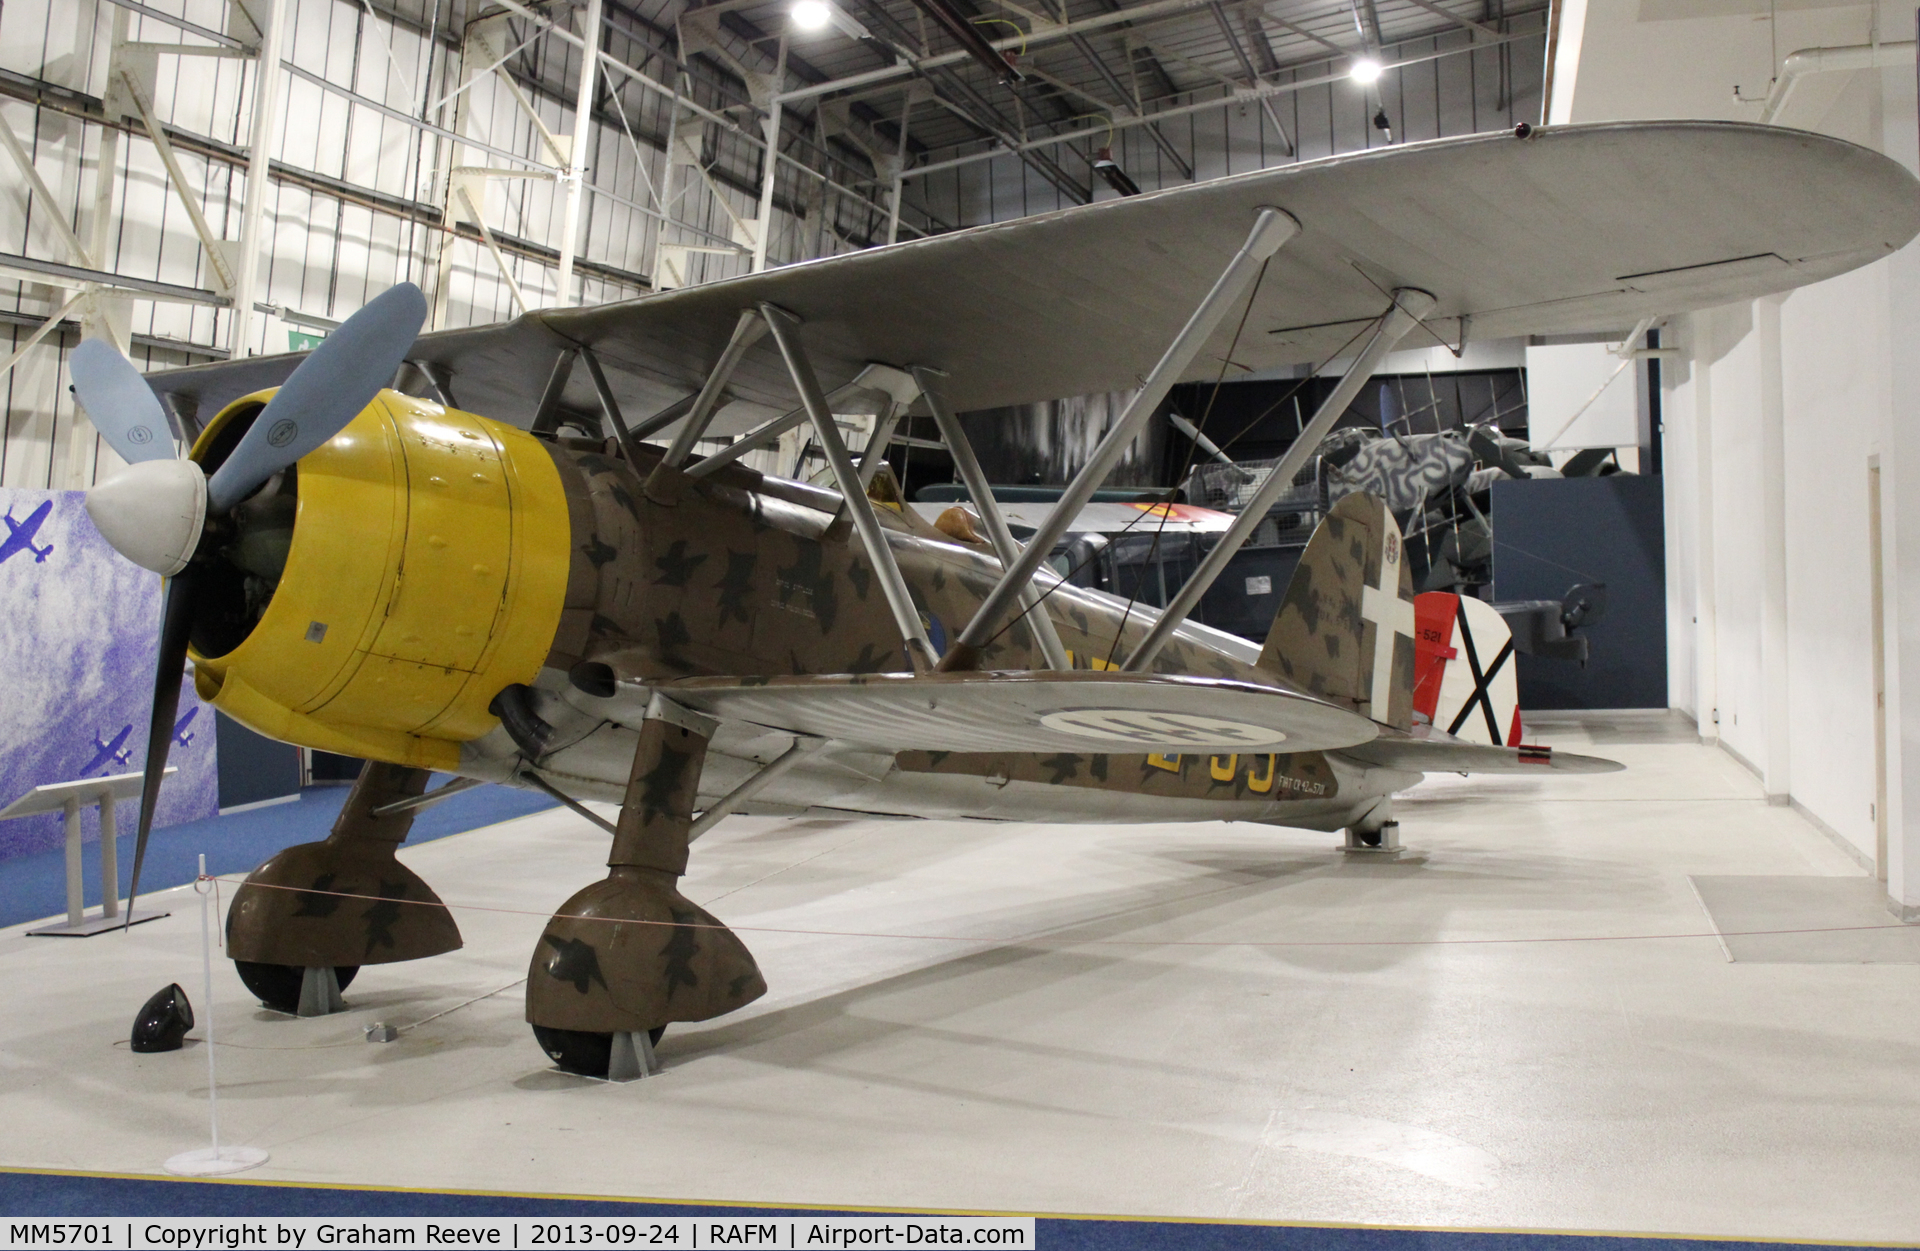 MM5701, Fiat CR.42 Falco C/N Not found MM5701, On display at the RAF Museum, Hendon.